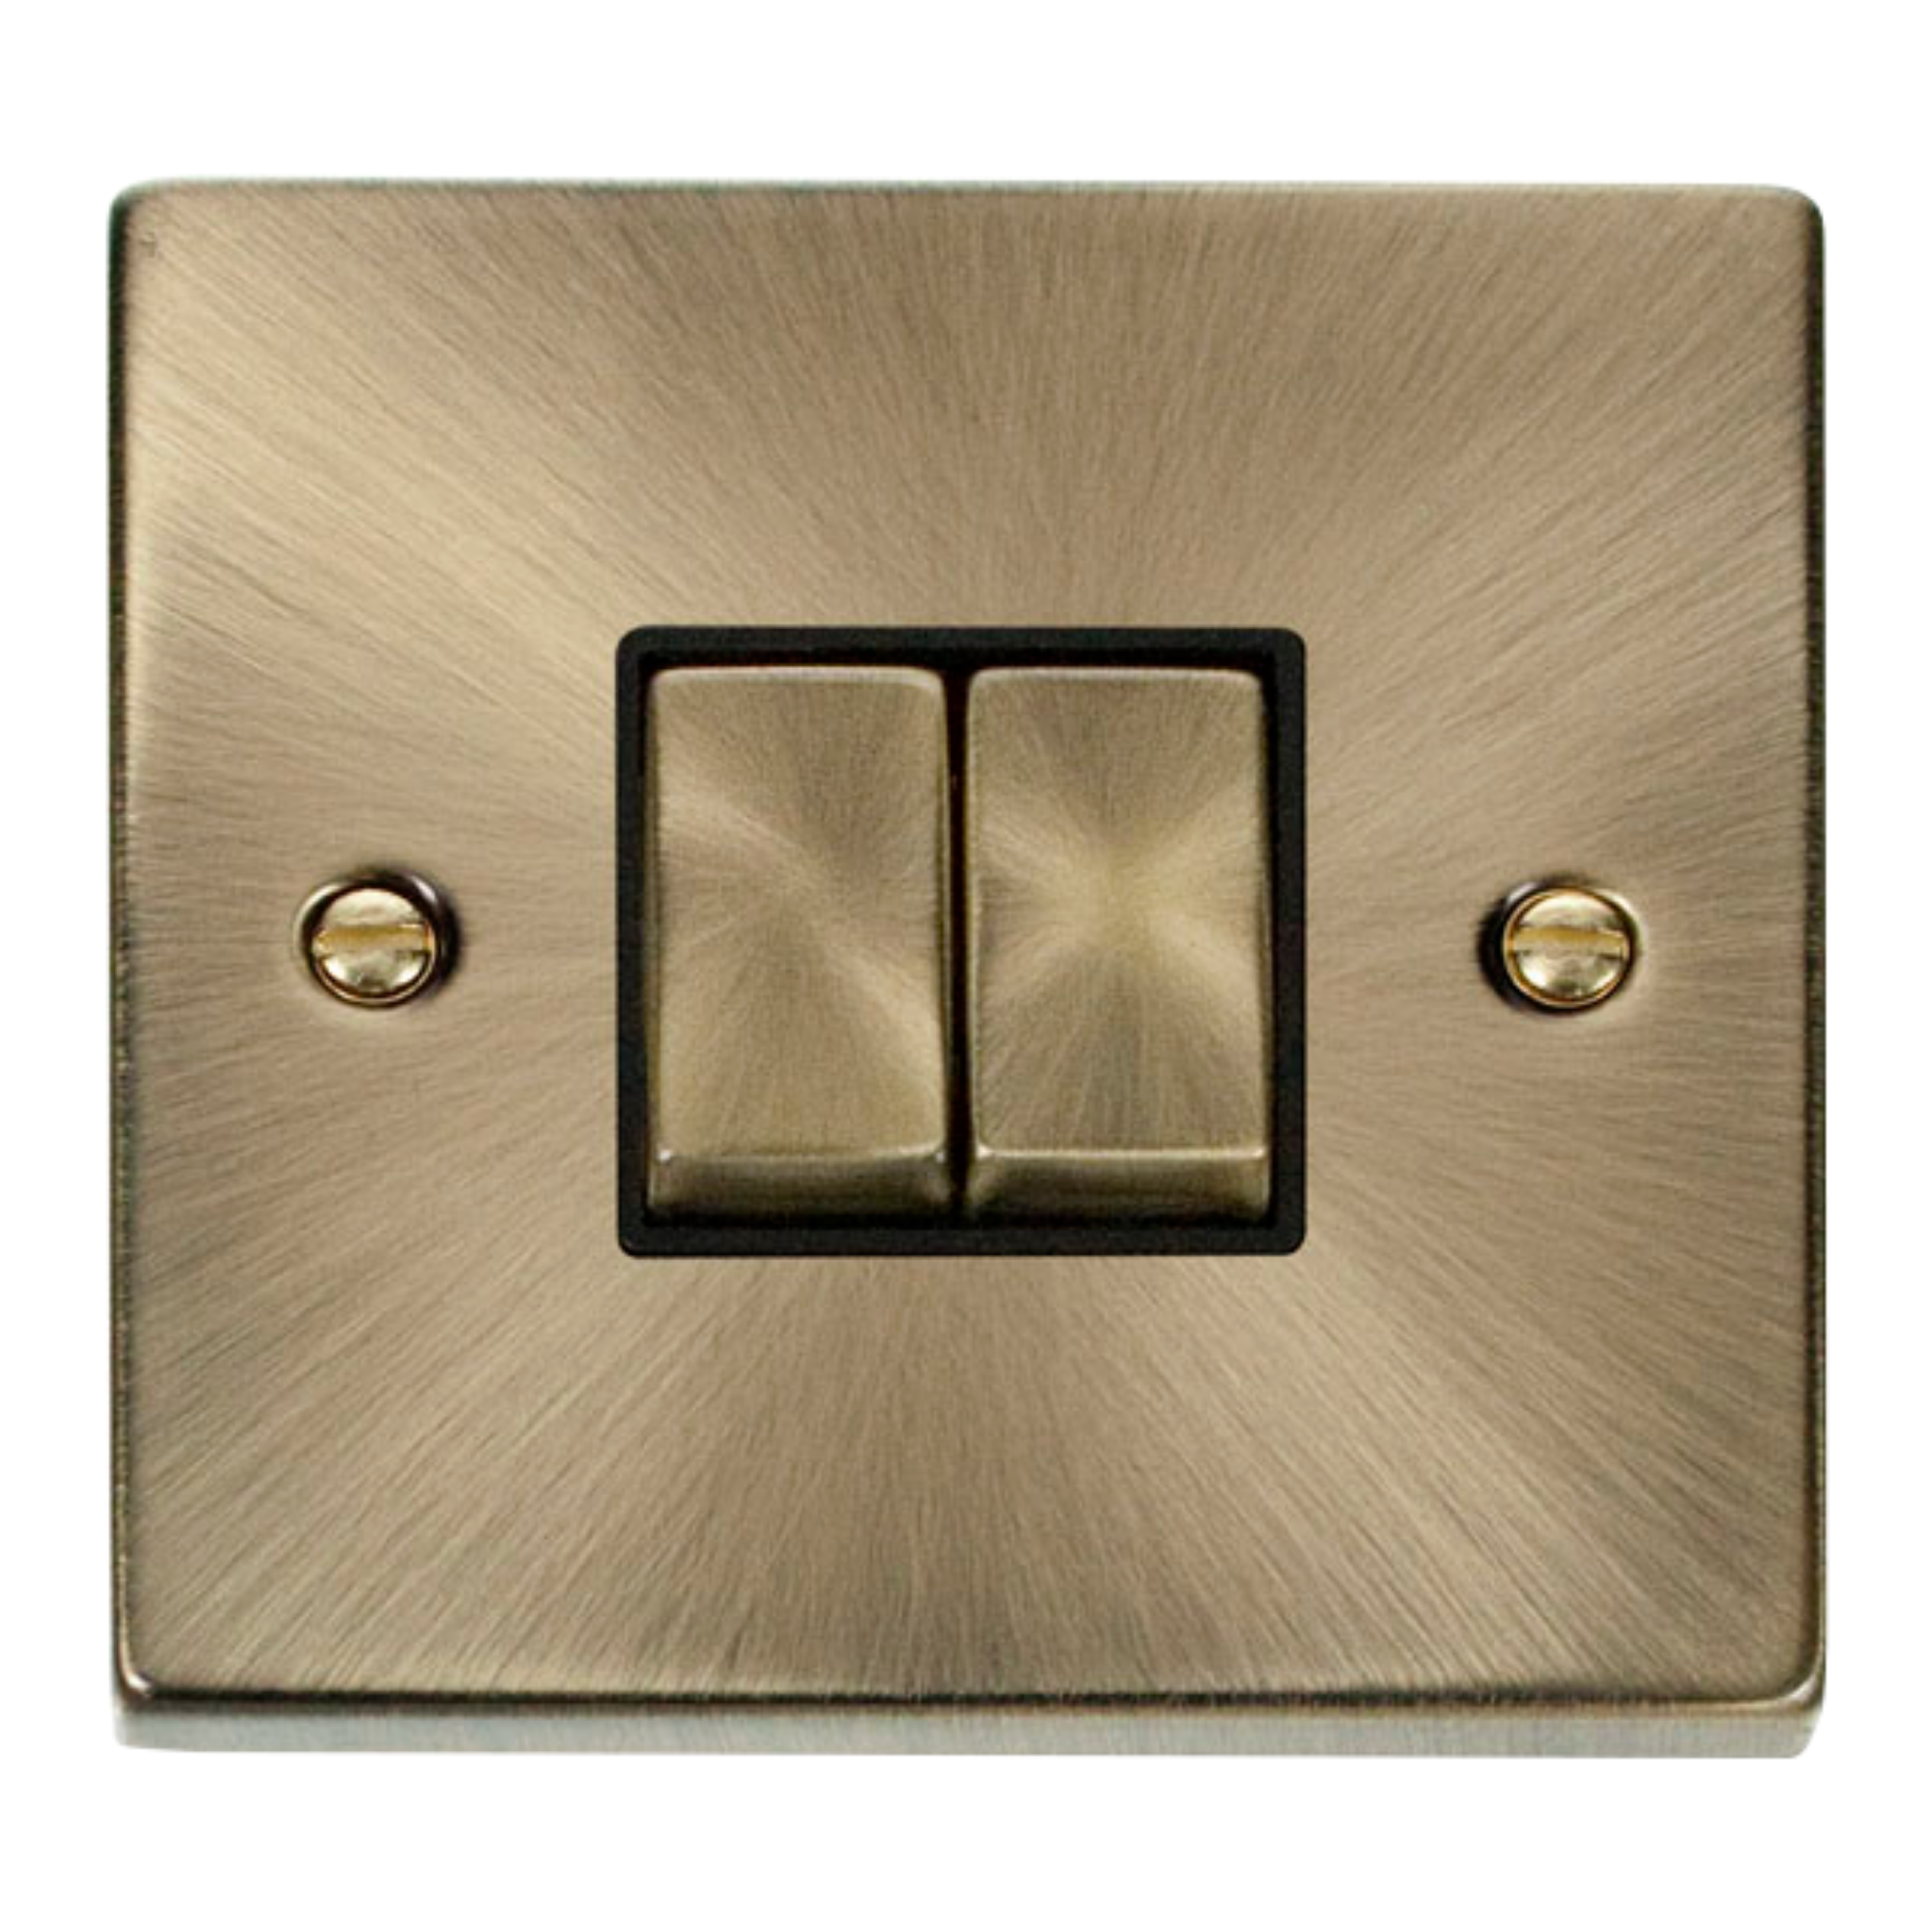 Z-Wave Dimmer Switch in Antique Gold